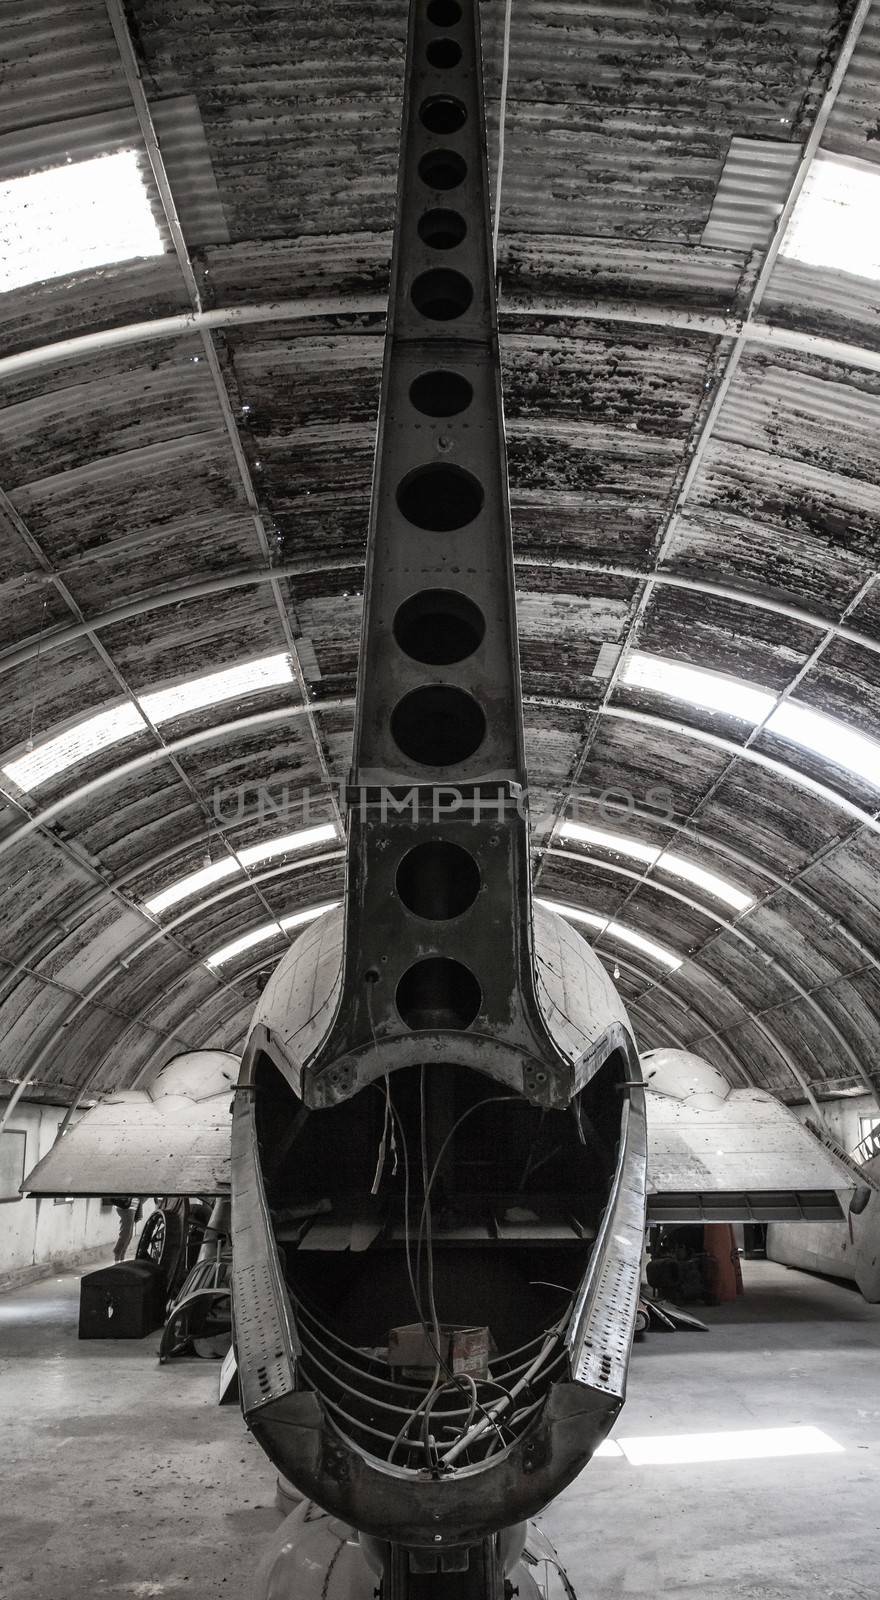 Tail section of an old aircraft lying in a hangar